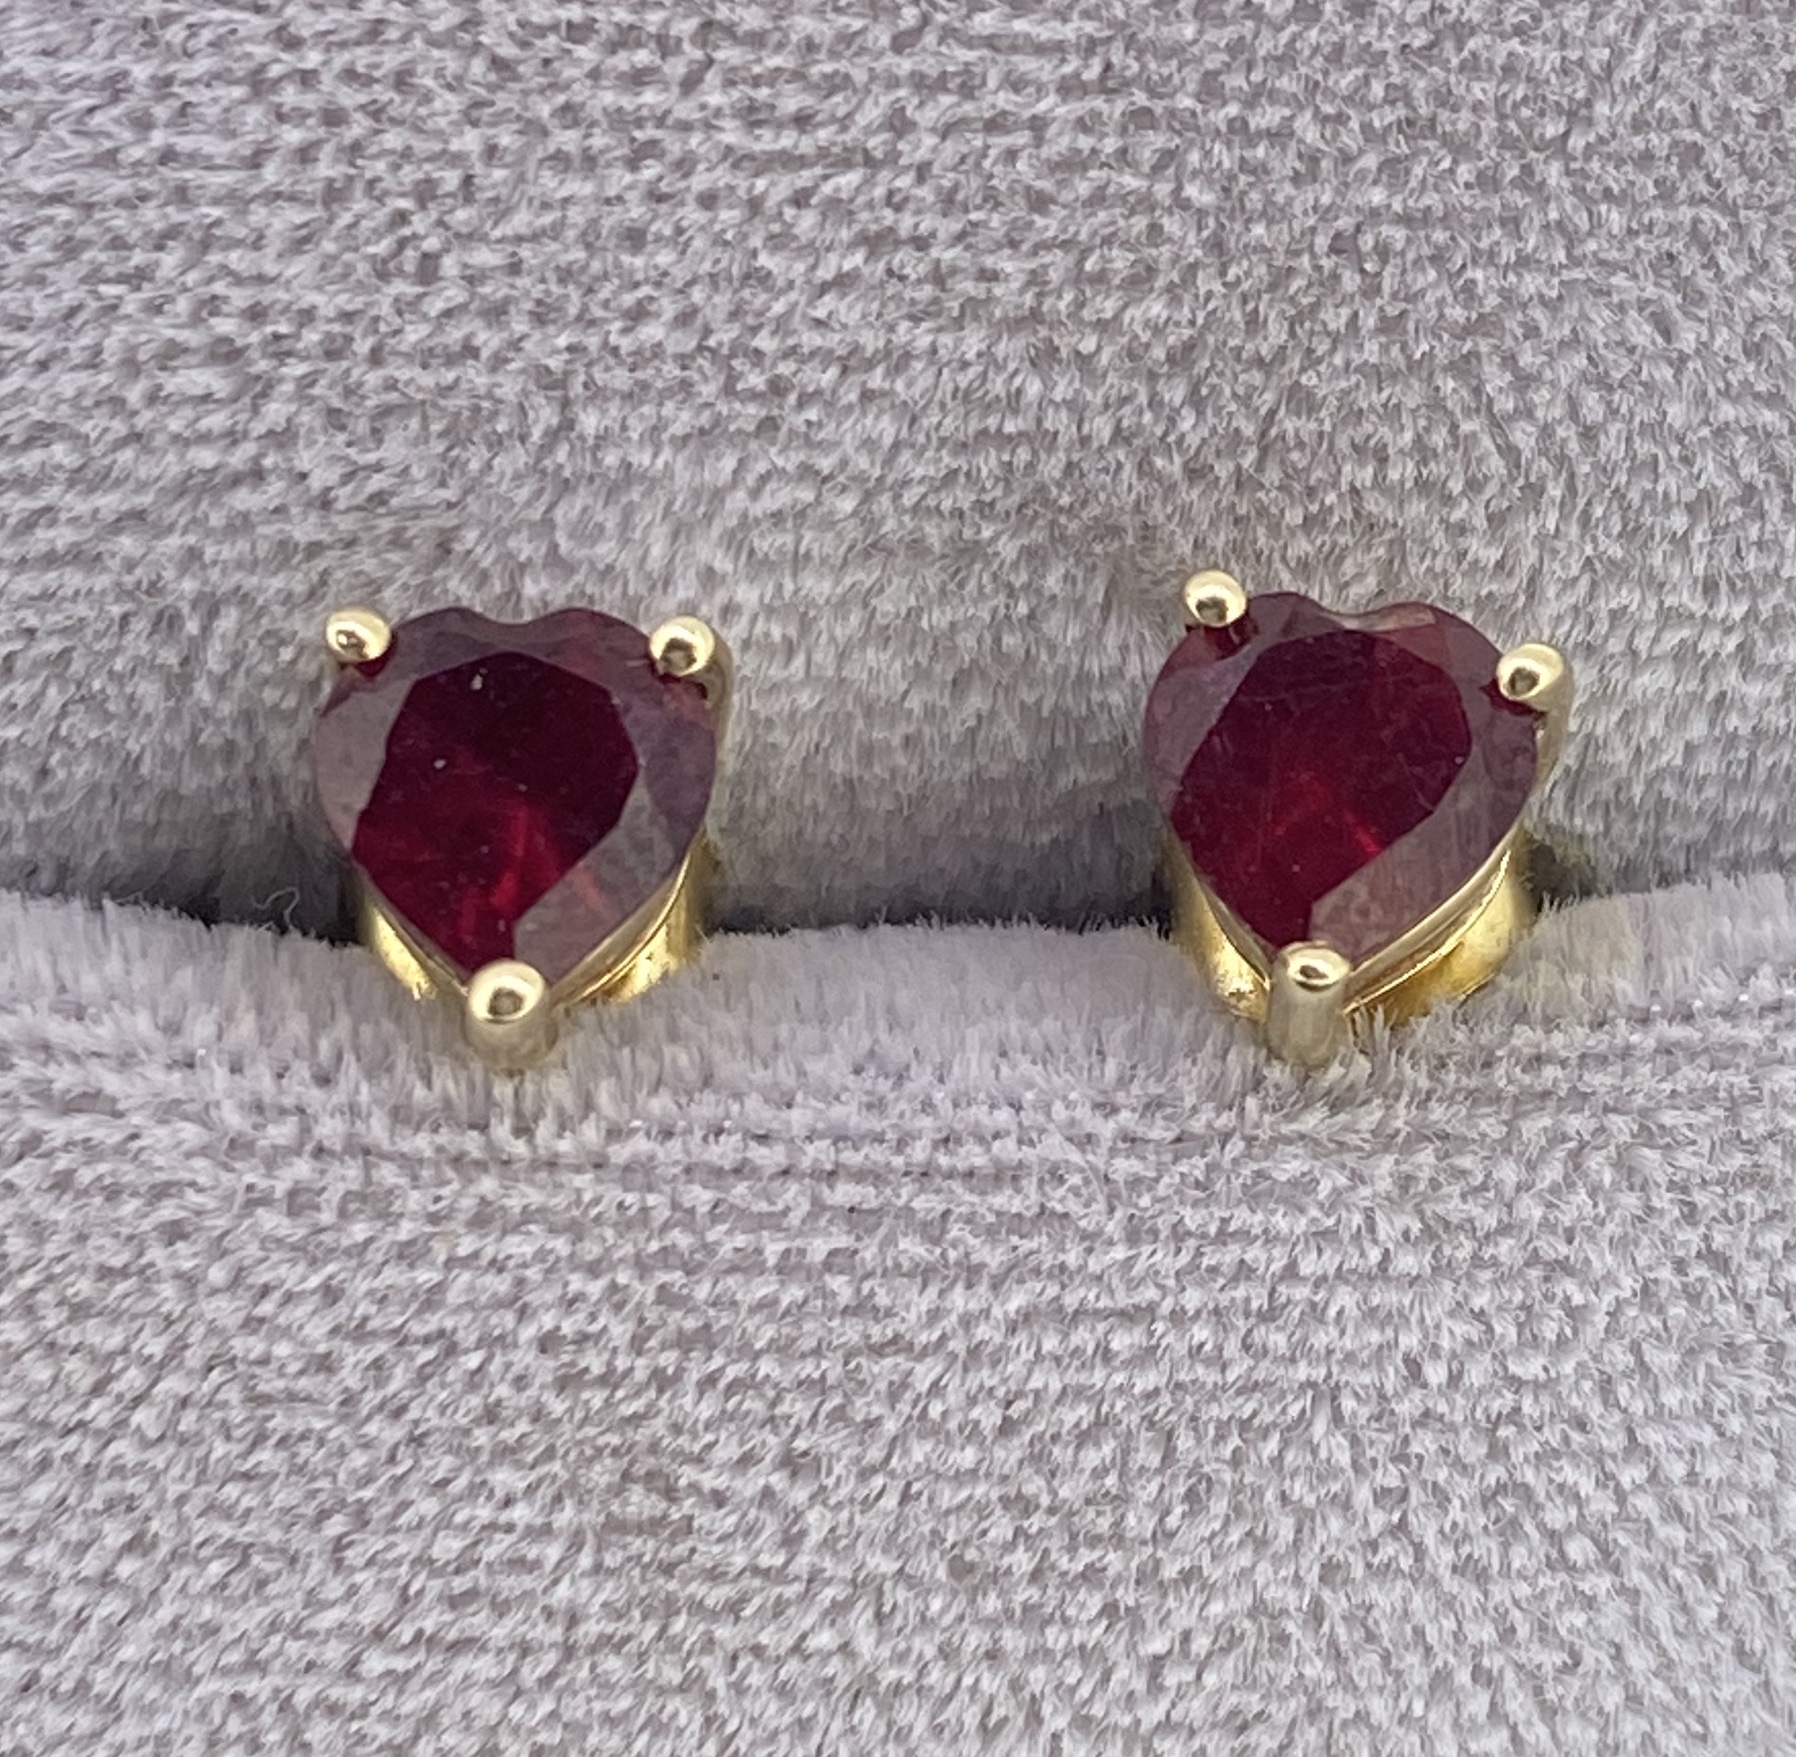 Vintage Ruby Stud Earrings in 9 Carat Gold - Chique to Antique Jewellery